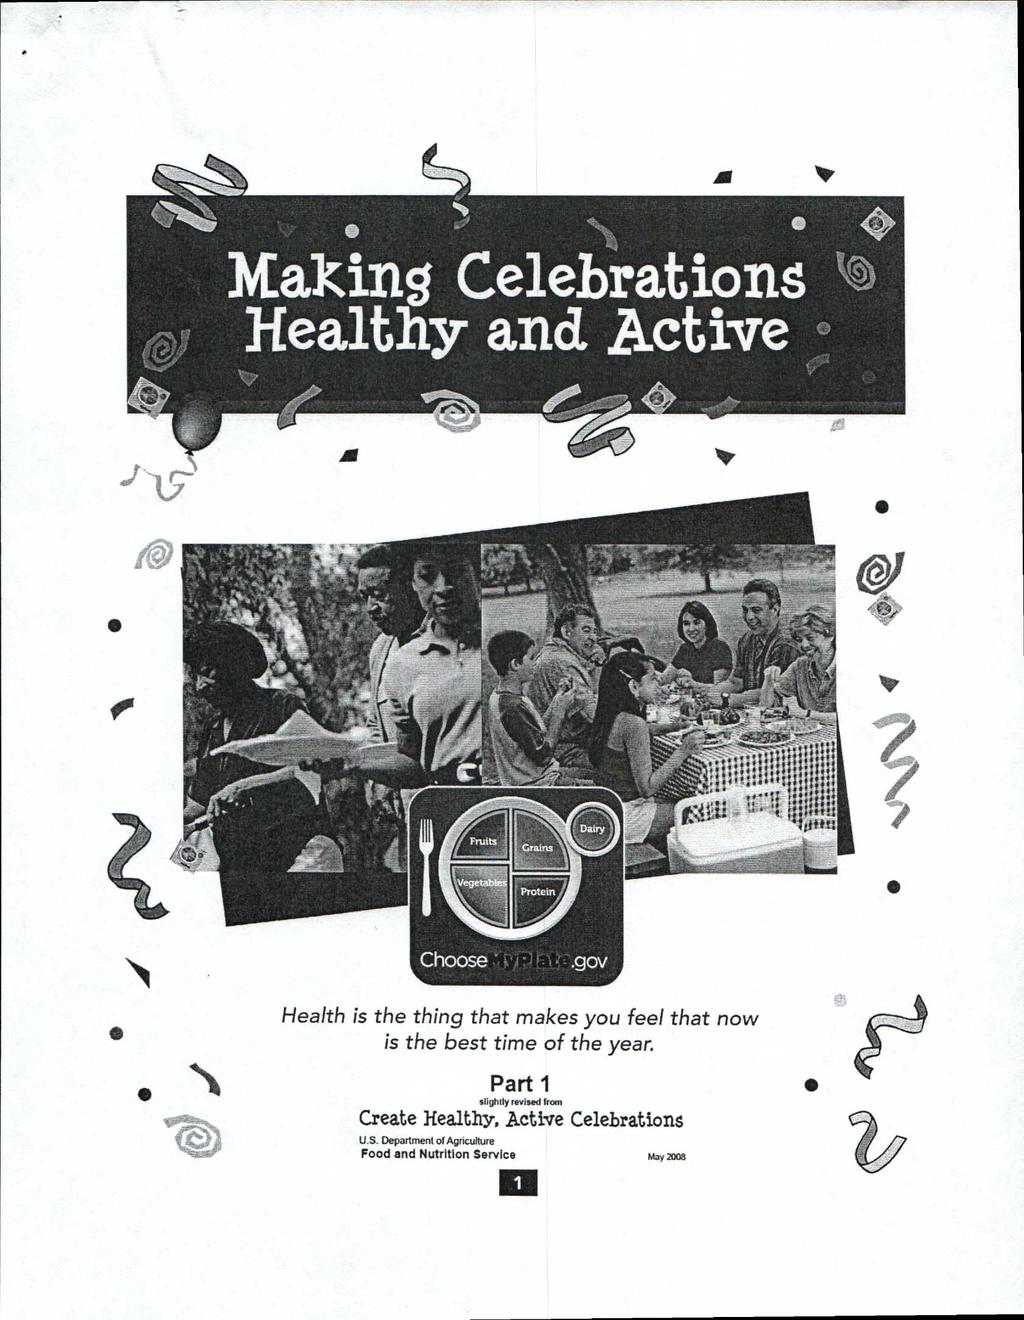 9 Making Celebrations Healthy and Active #00 O, Health is the thing that makes you feel that now is the best time of the year.